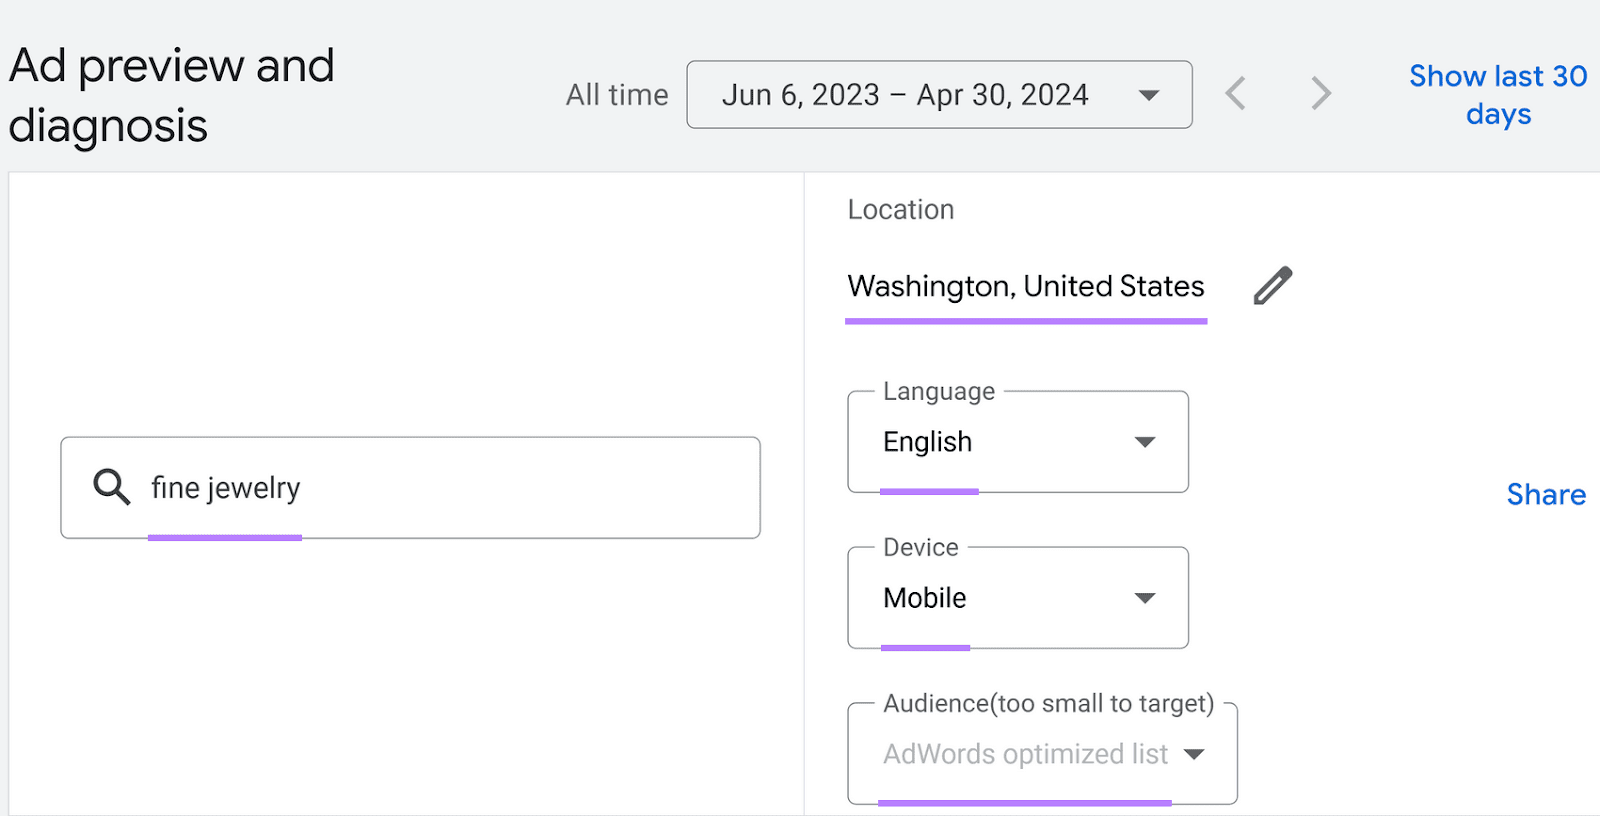 Ad preview and diagnosis tool displaying settings for location in Washington, language English, and mobile device.